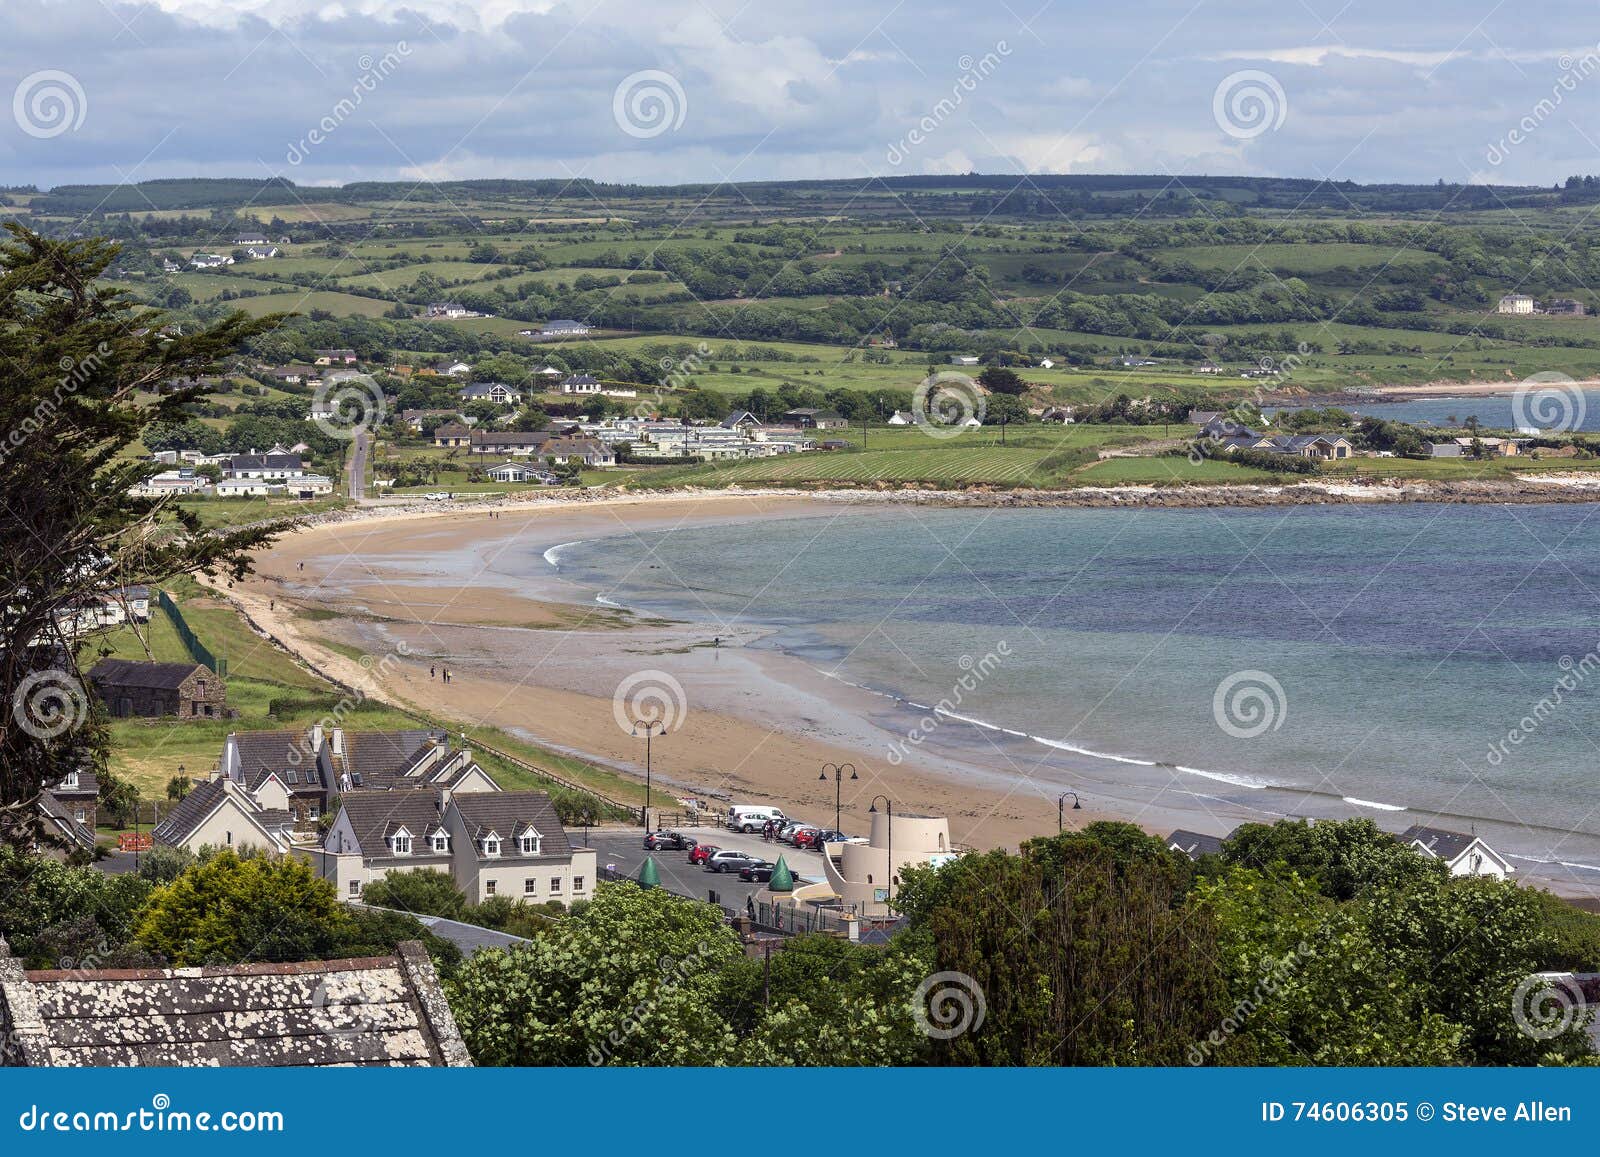 Ardmore County Waterford Ireland Stock Image Image Of Coast Scenic